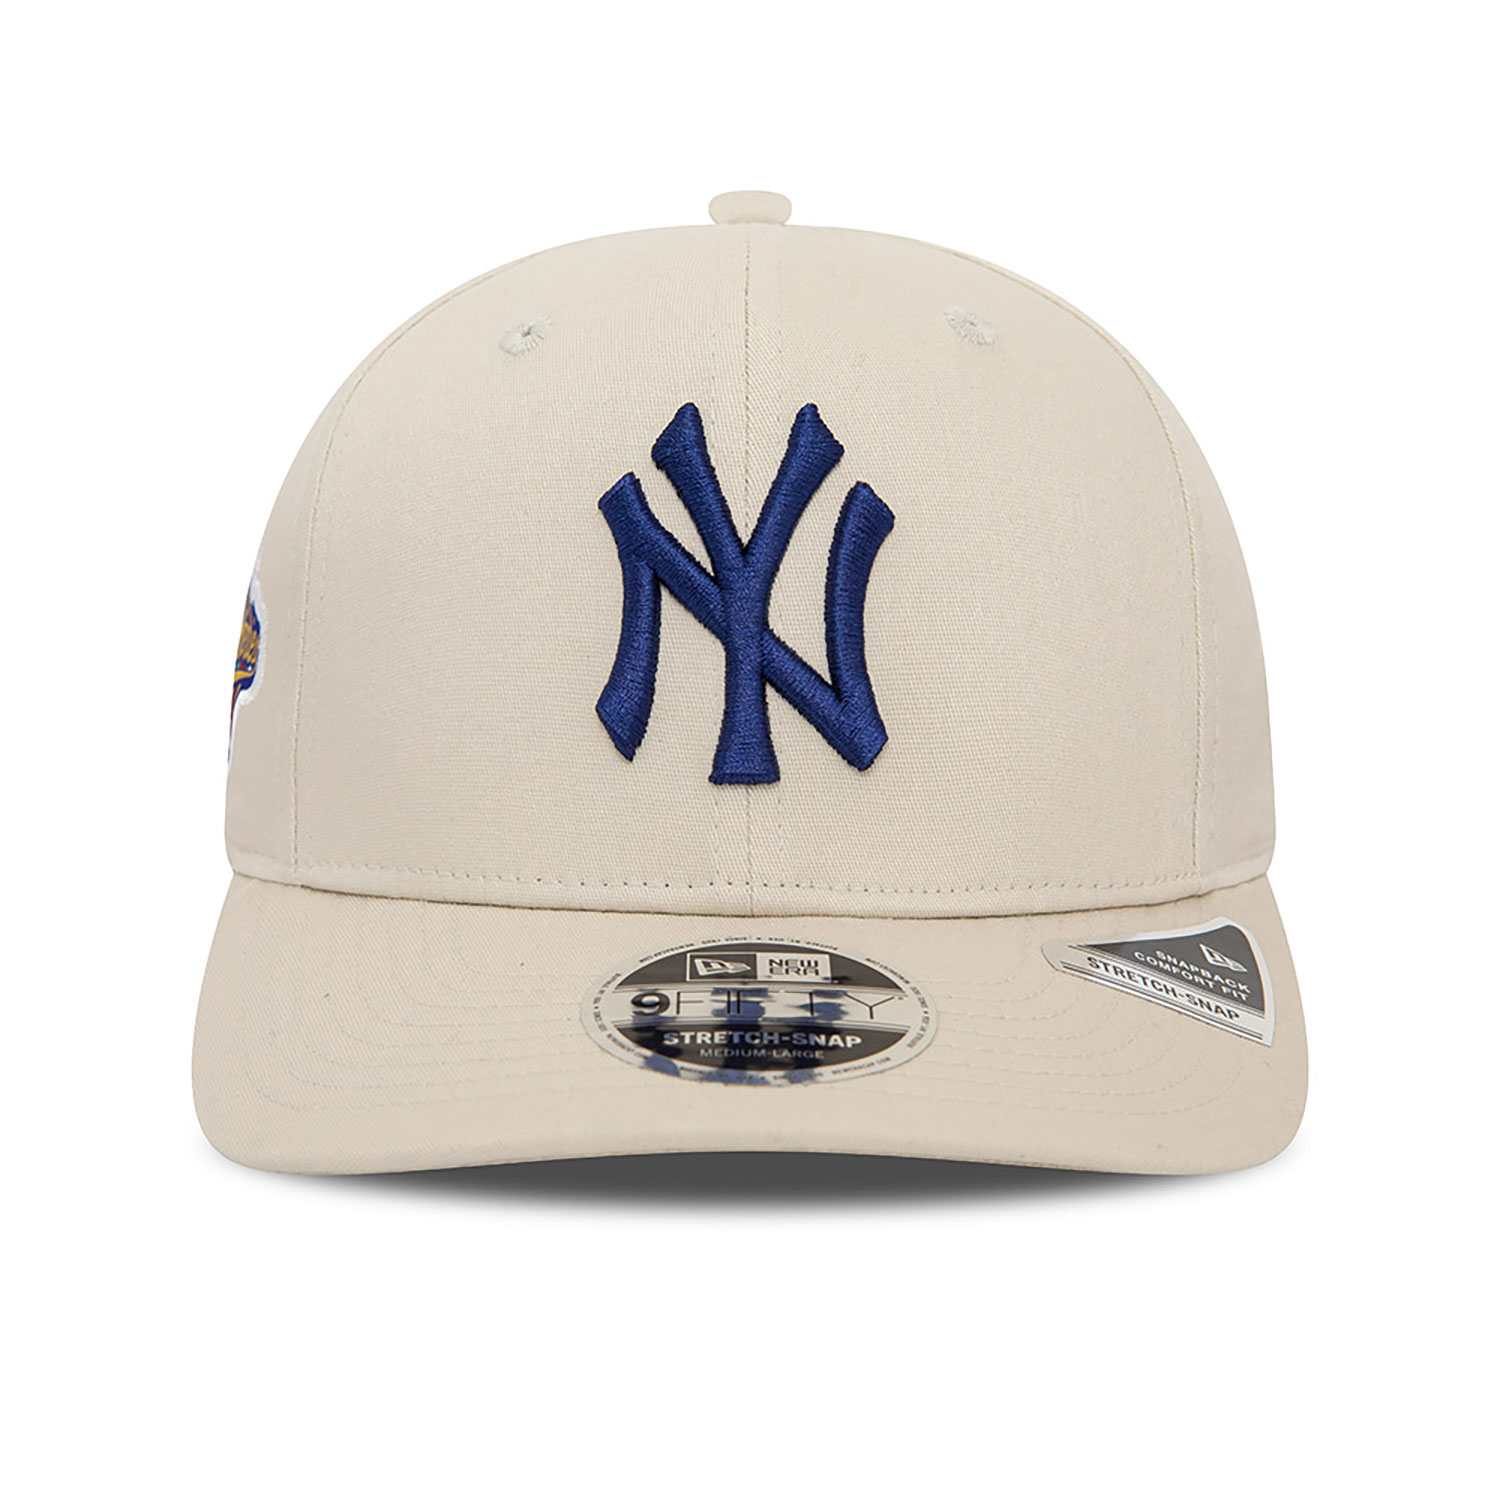 New York Yankees World Series Stone 9FIFTY Stretch Snap Cap